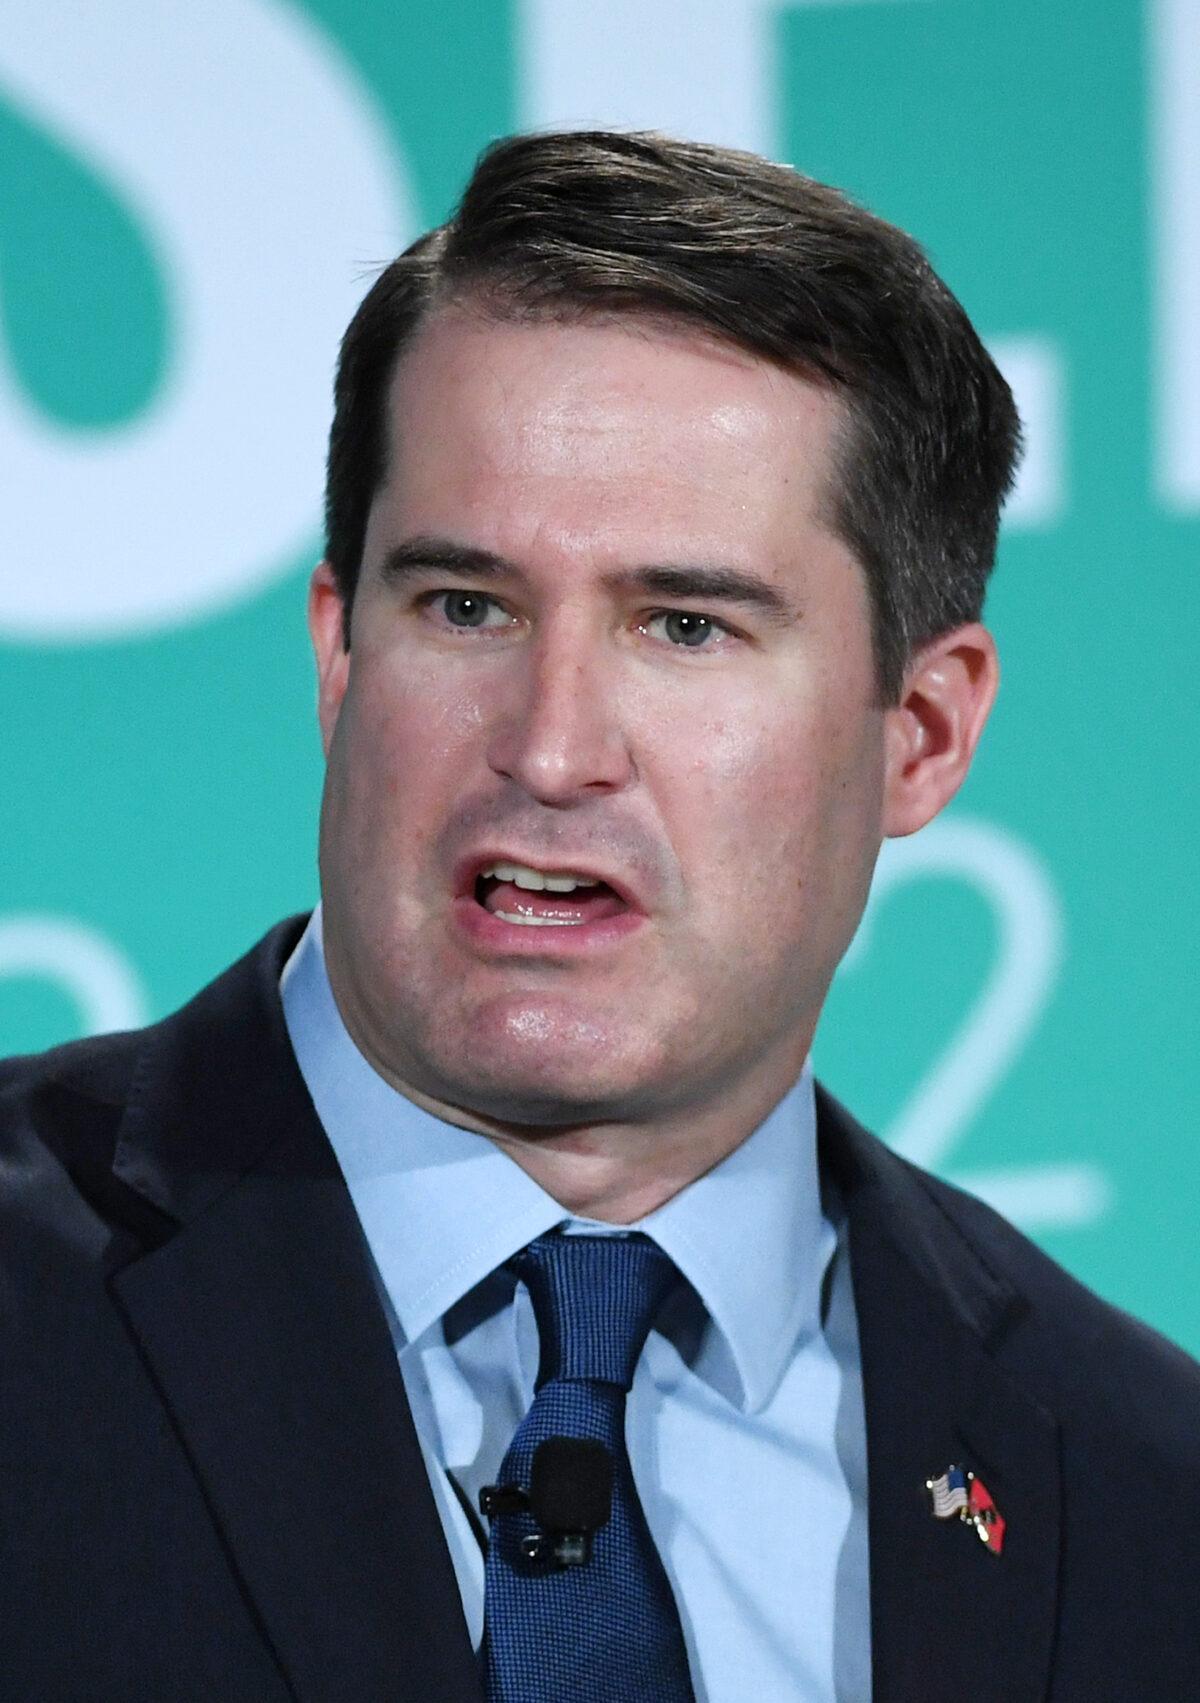 Rep. Seth Moulton (D-Mass.) speaks during the 2020 Public Service Forum hosted by the American Federation of State, County and Municipal Employees (AFSCME) at UNLV in Las Vegas, Nev., on Aug. 3, 2019. (Ethan Miller/Getty Images)